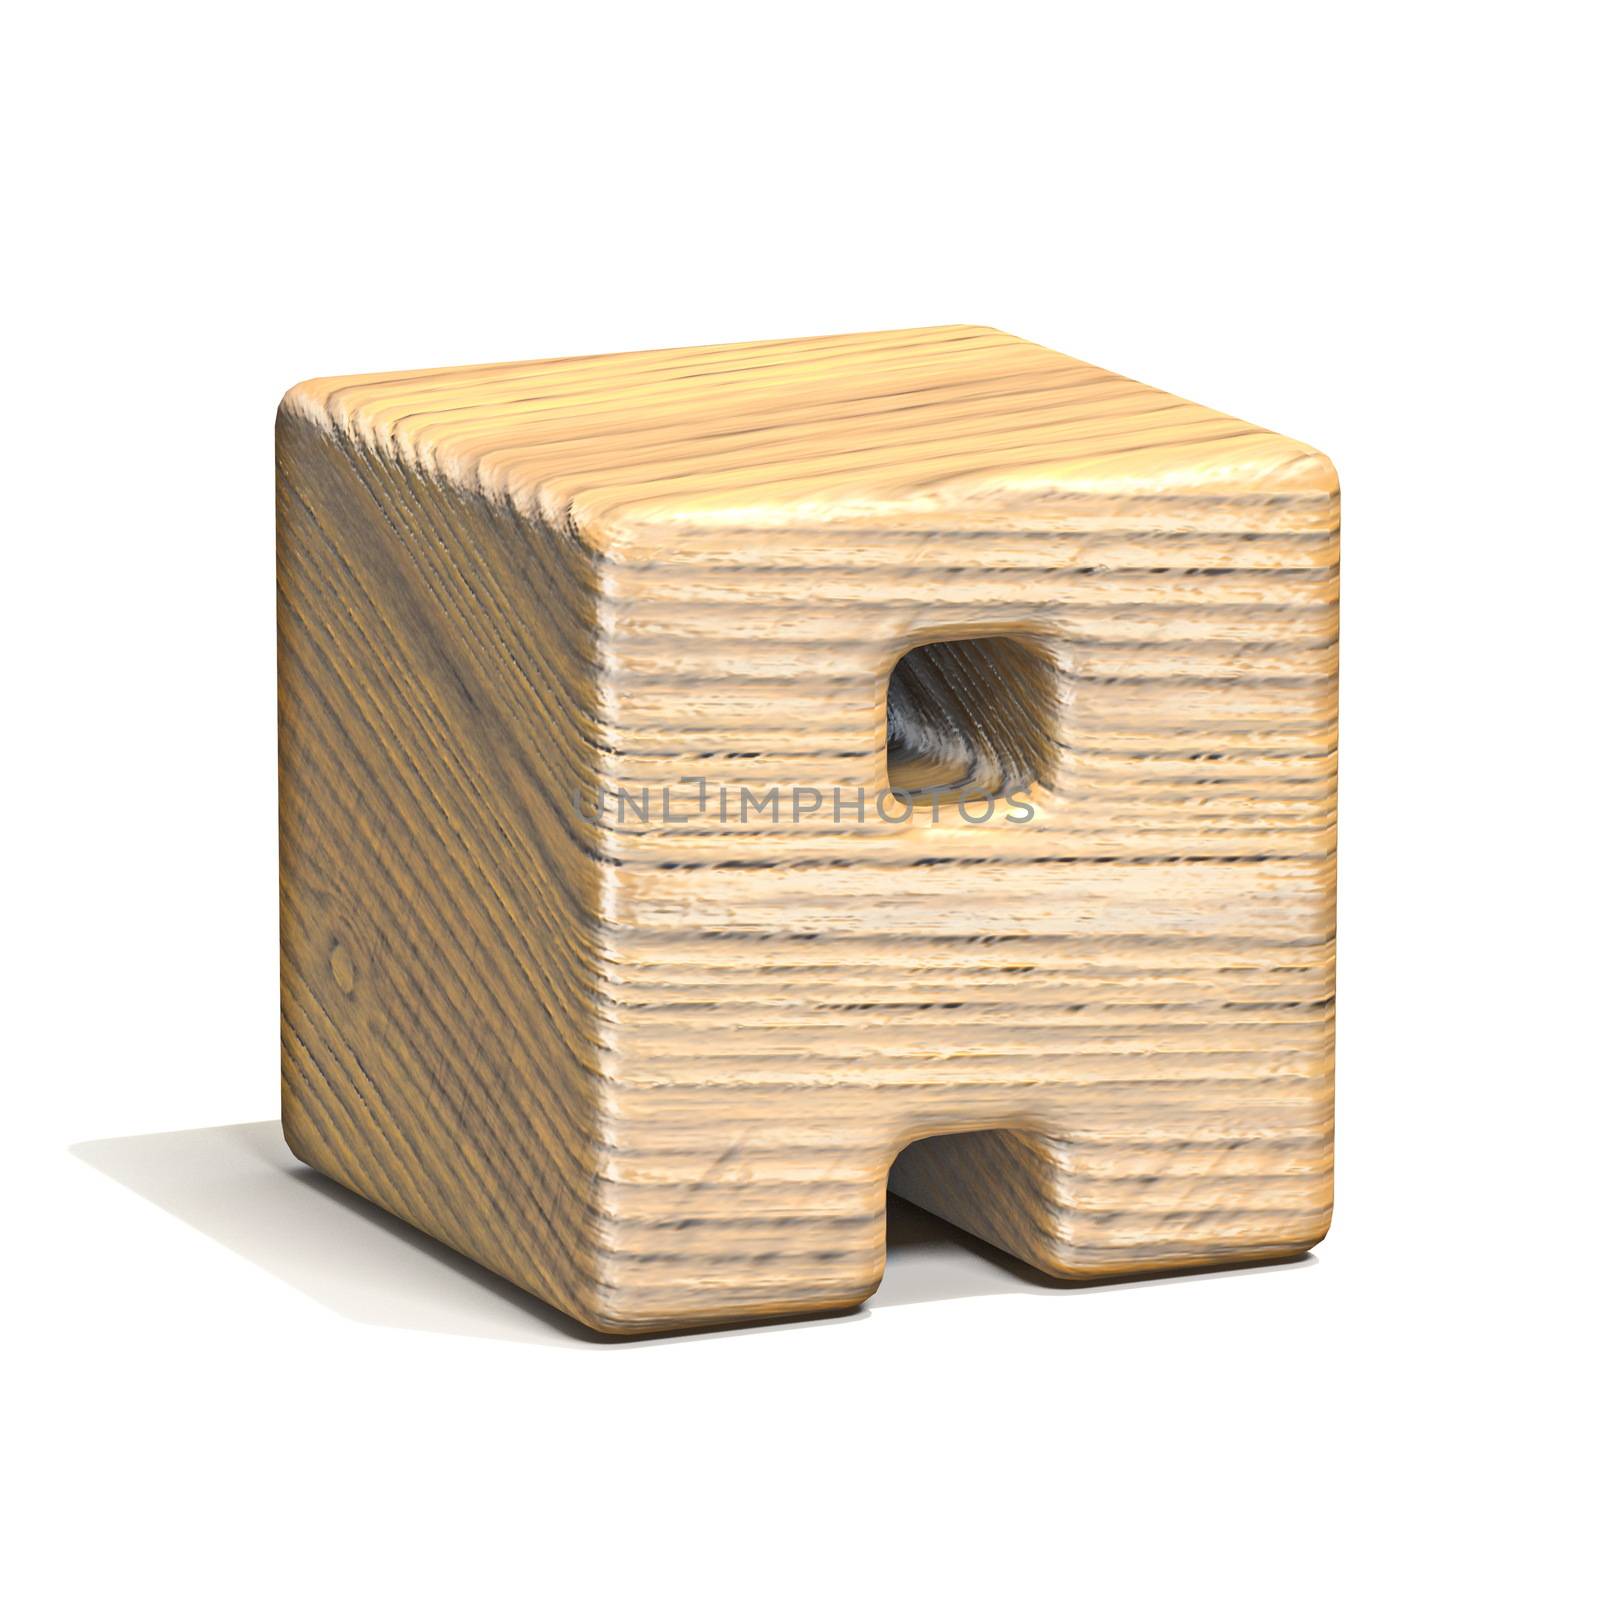 Solid wooden cube font Letter A 3D render illustration isolated on white background